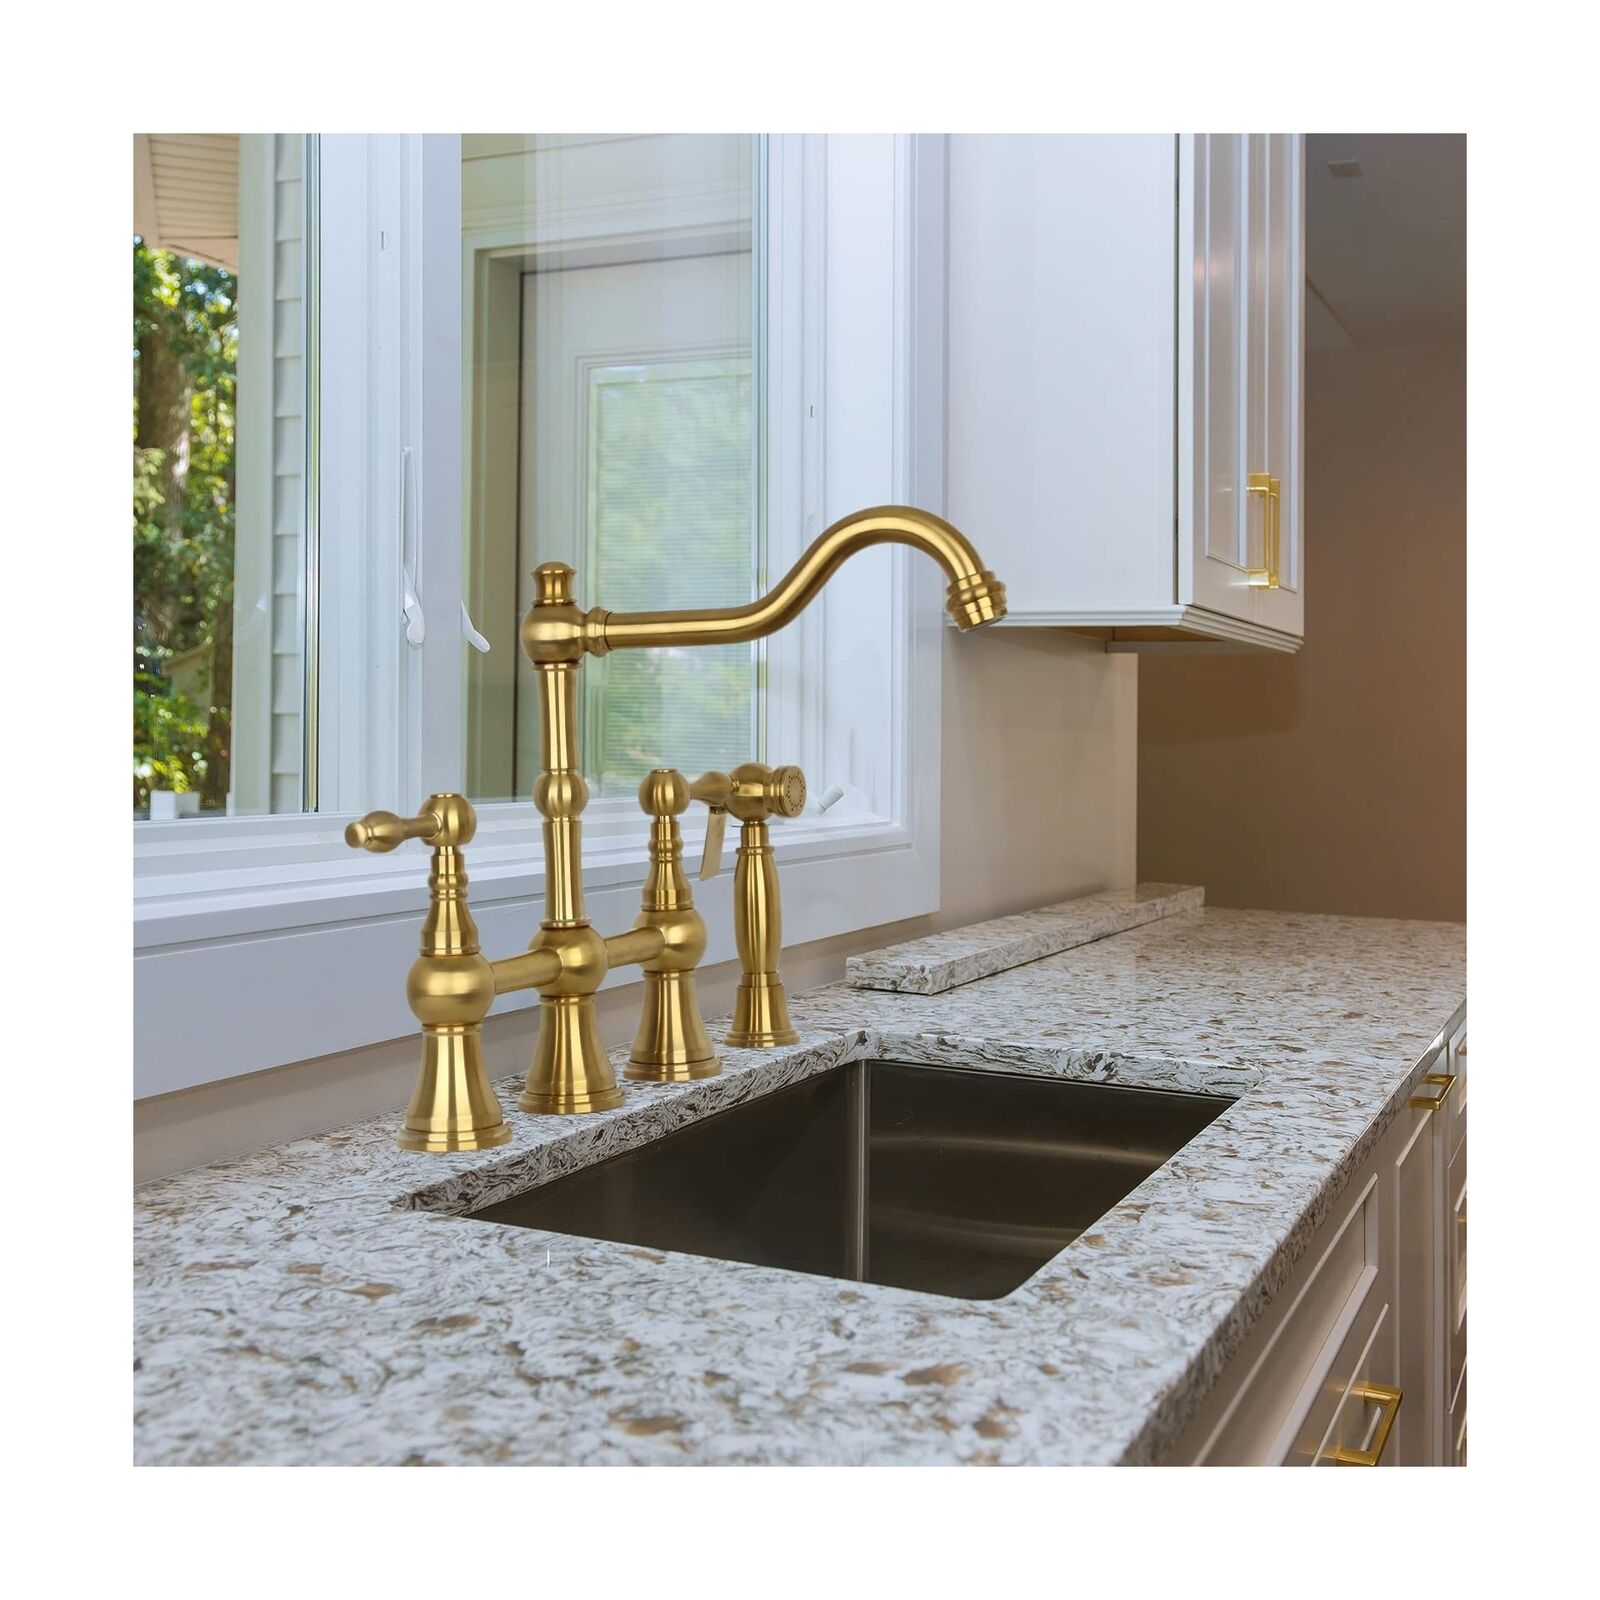 thinkstar Two-Handles Bridge Kitchen Faucet With Side Sprayer (Brushed Gold) Brushed Gold